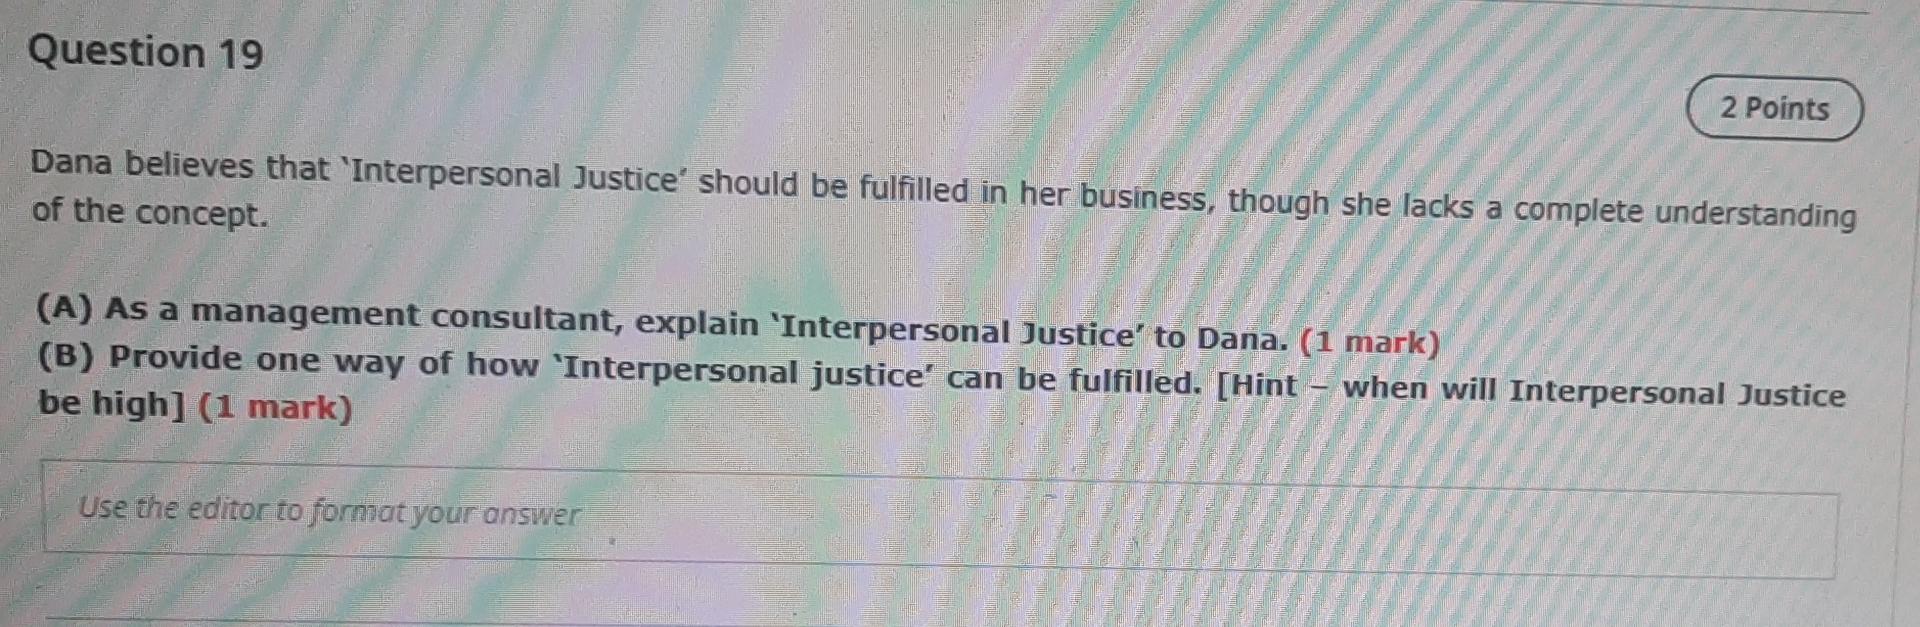 Question 19
2 Points
Dana believes that Interpersonal Justice should be fulfilled in her business, though she lacks a compl